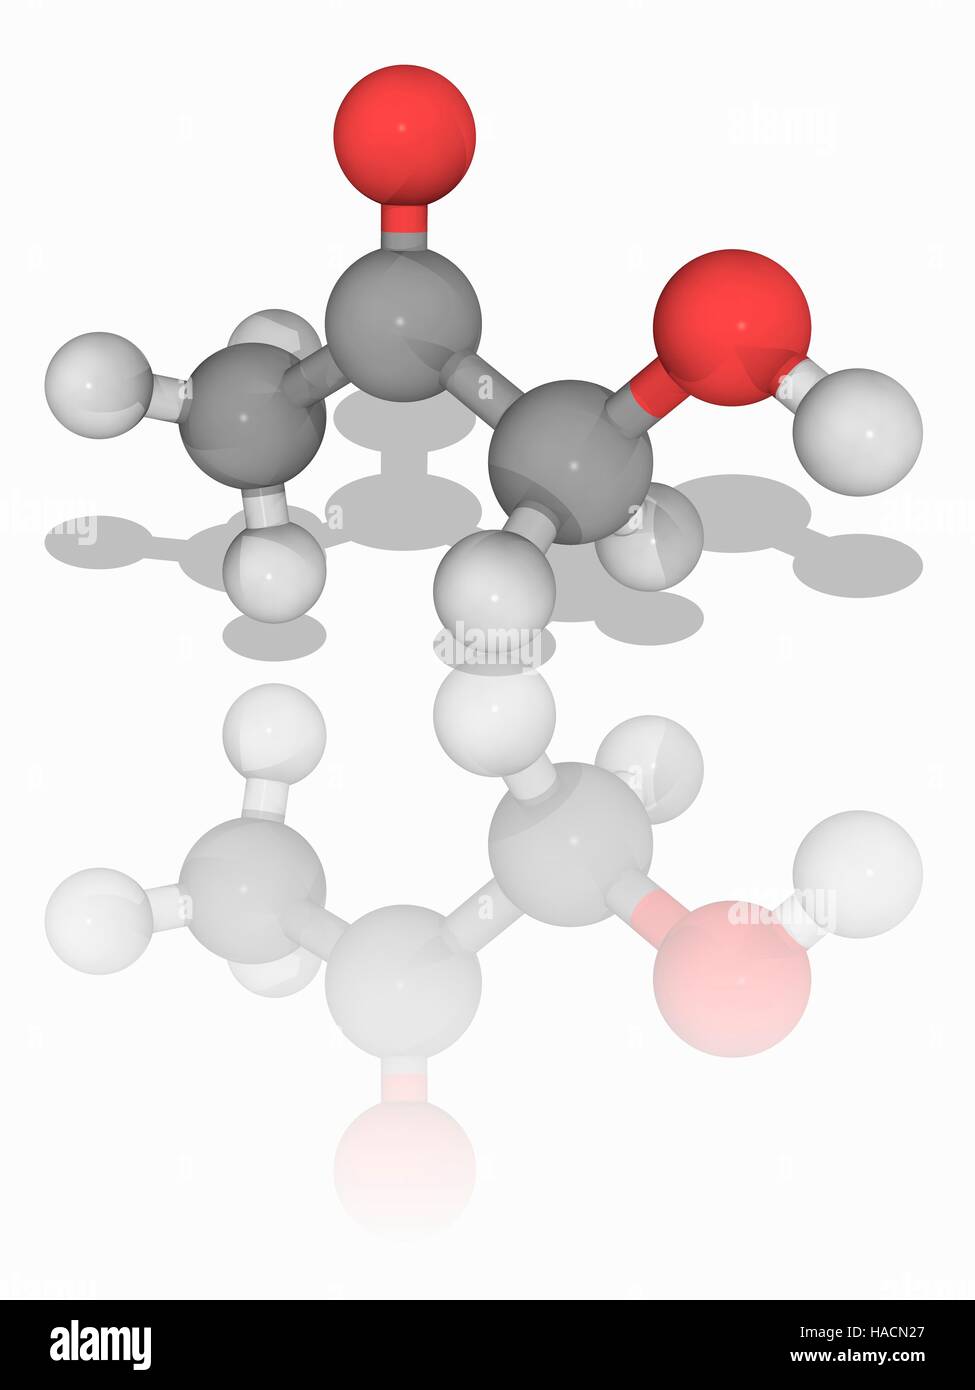 Acetol. Molecular model of the ketone acetol (C3.H6.O2), also known as hydroxyacetone and 1-hydroxy-2-propanone. It is also known as acetone alcohol and combines the functional group of a ketone with that of an alcohol. Atoms are represented as spheres and are colour-coded: carbon (grey), hydrogen (white) and oxygen (red). Illustration. Stock Photo